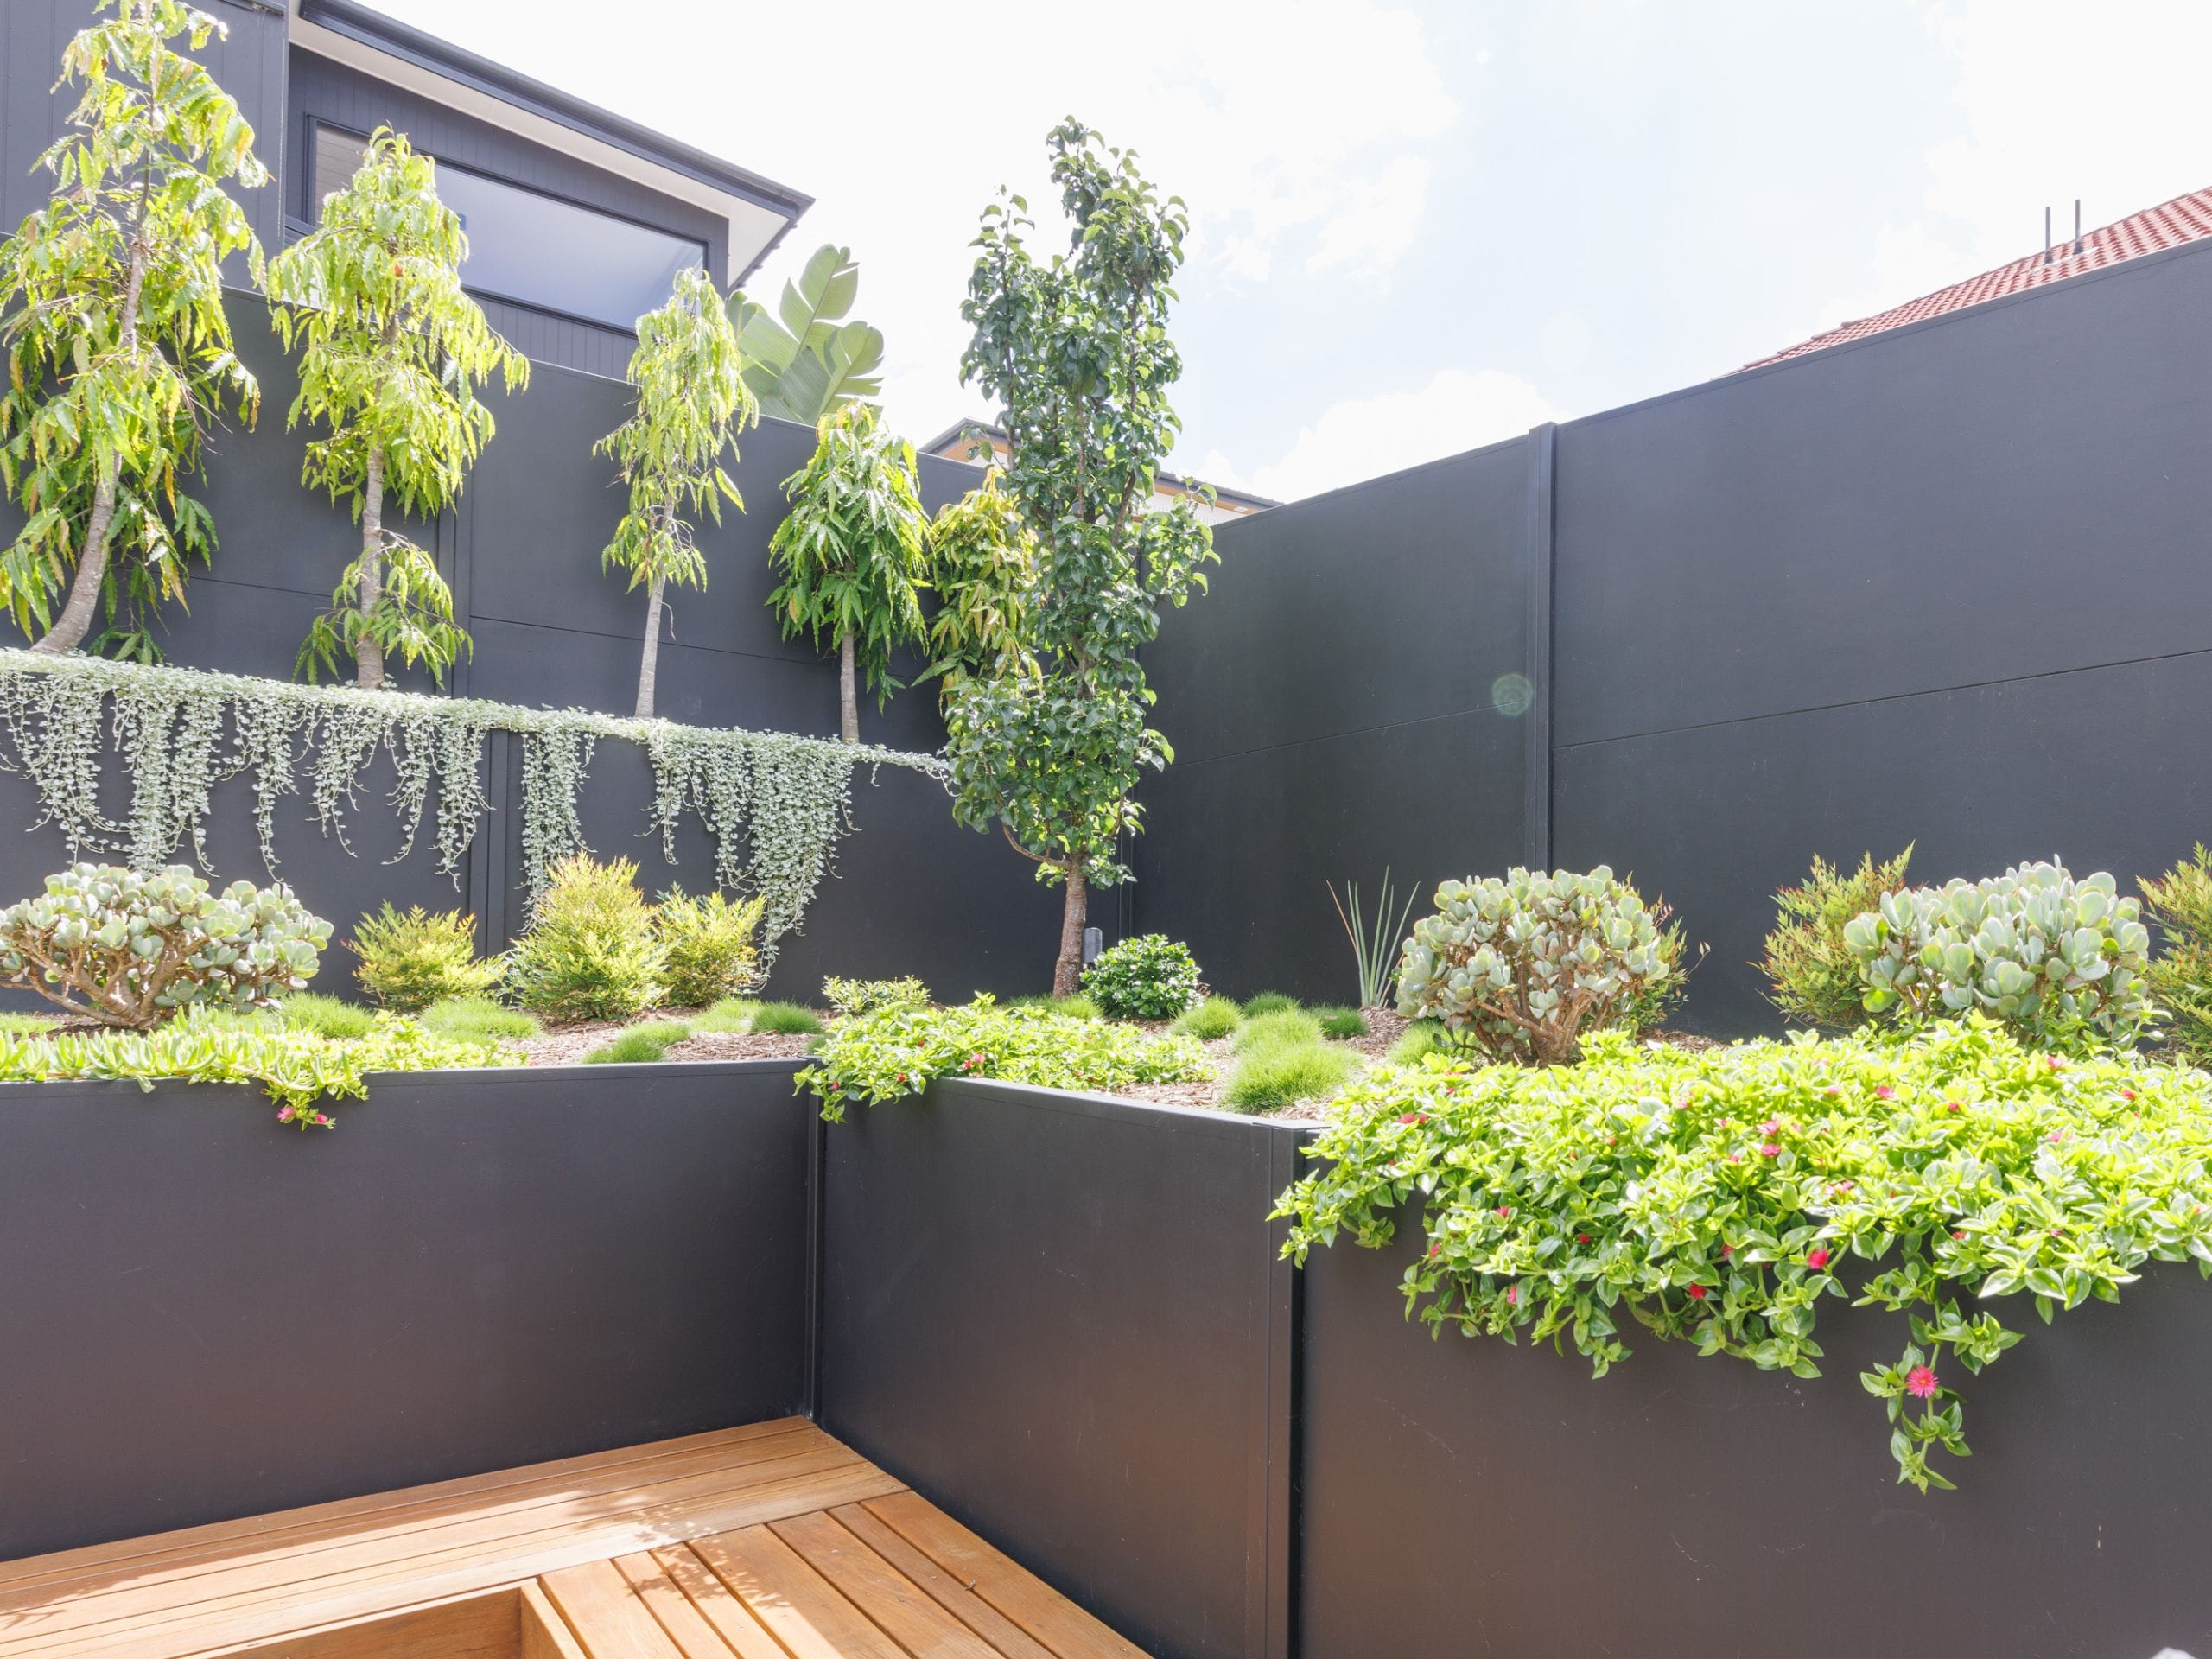 A vertical garden adds depth and colour to any backyard